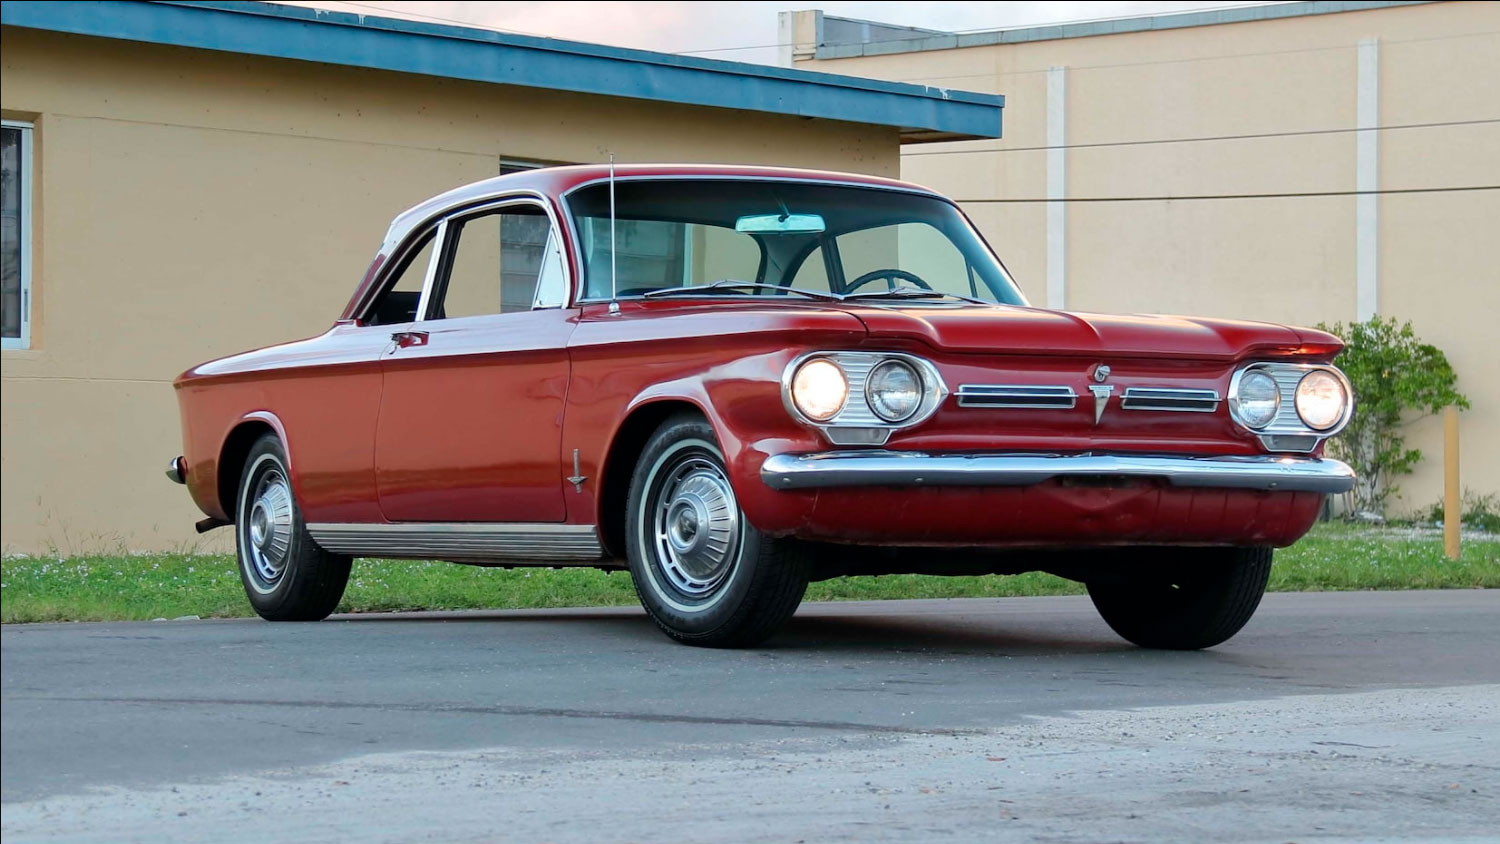 An Interview With The Chevy Corvair Miami Collection Owner